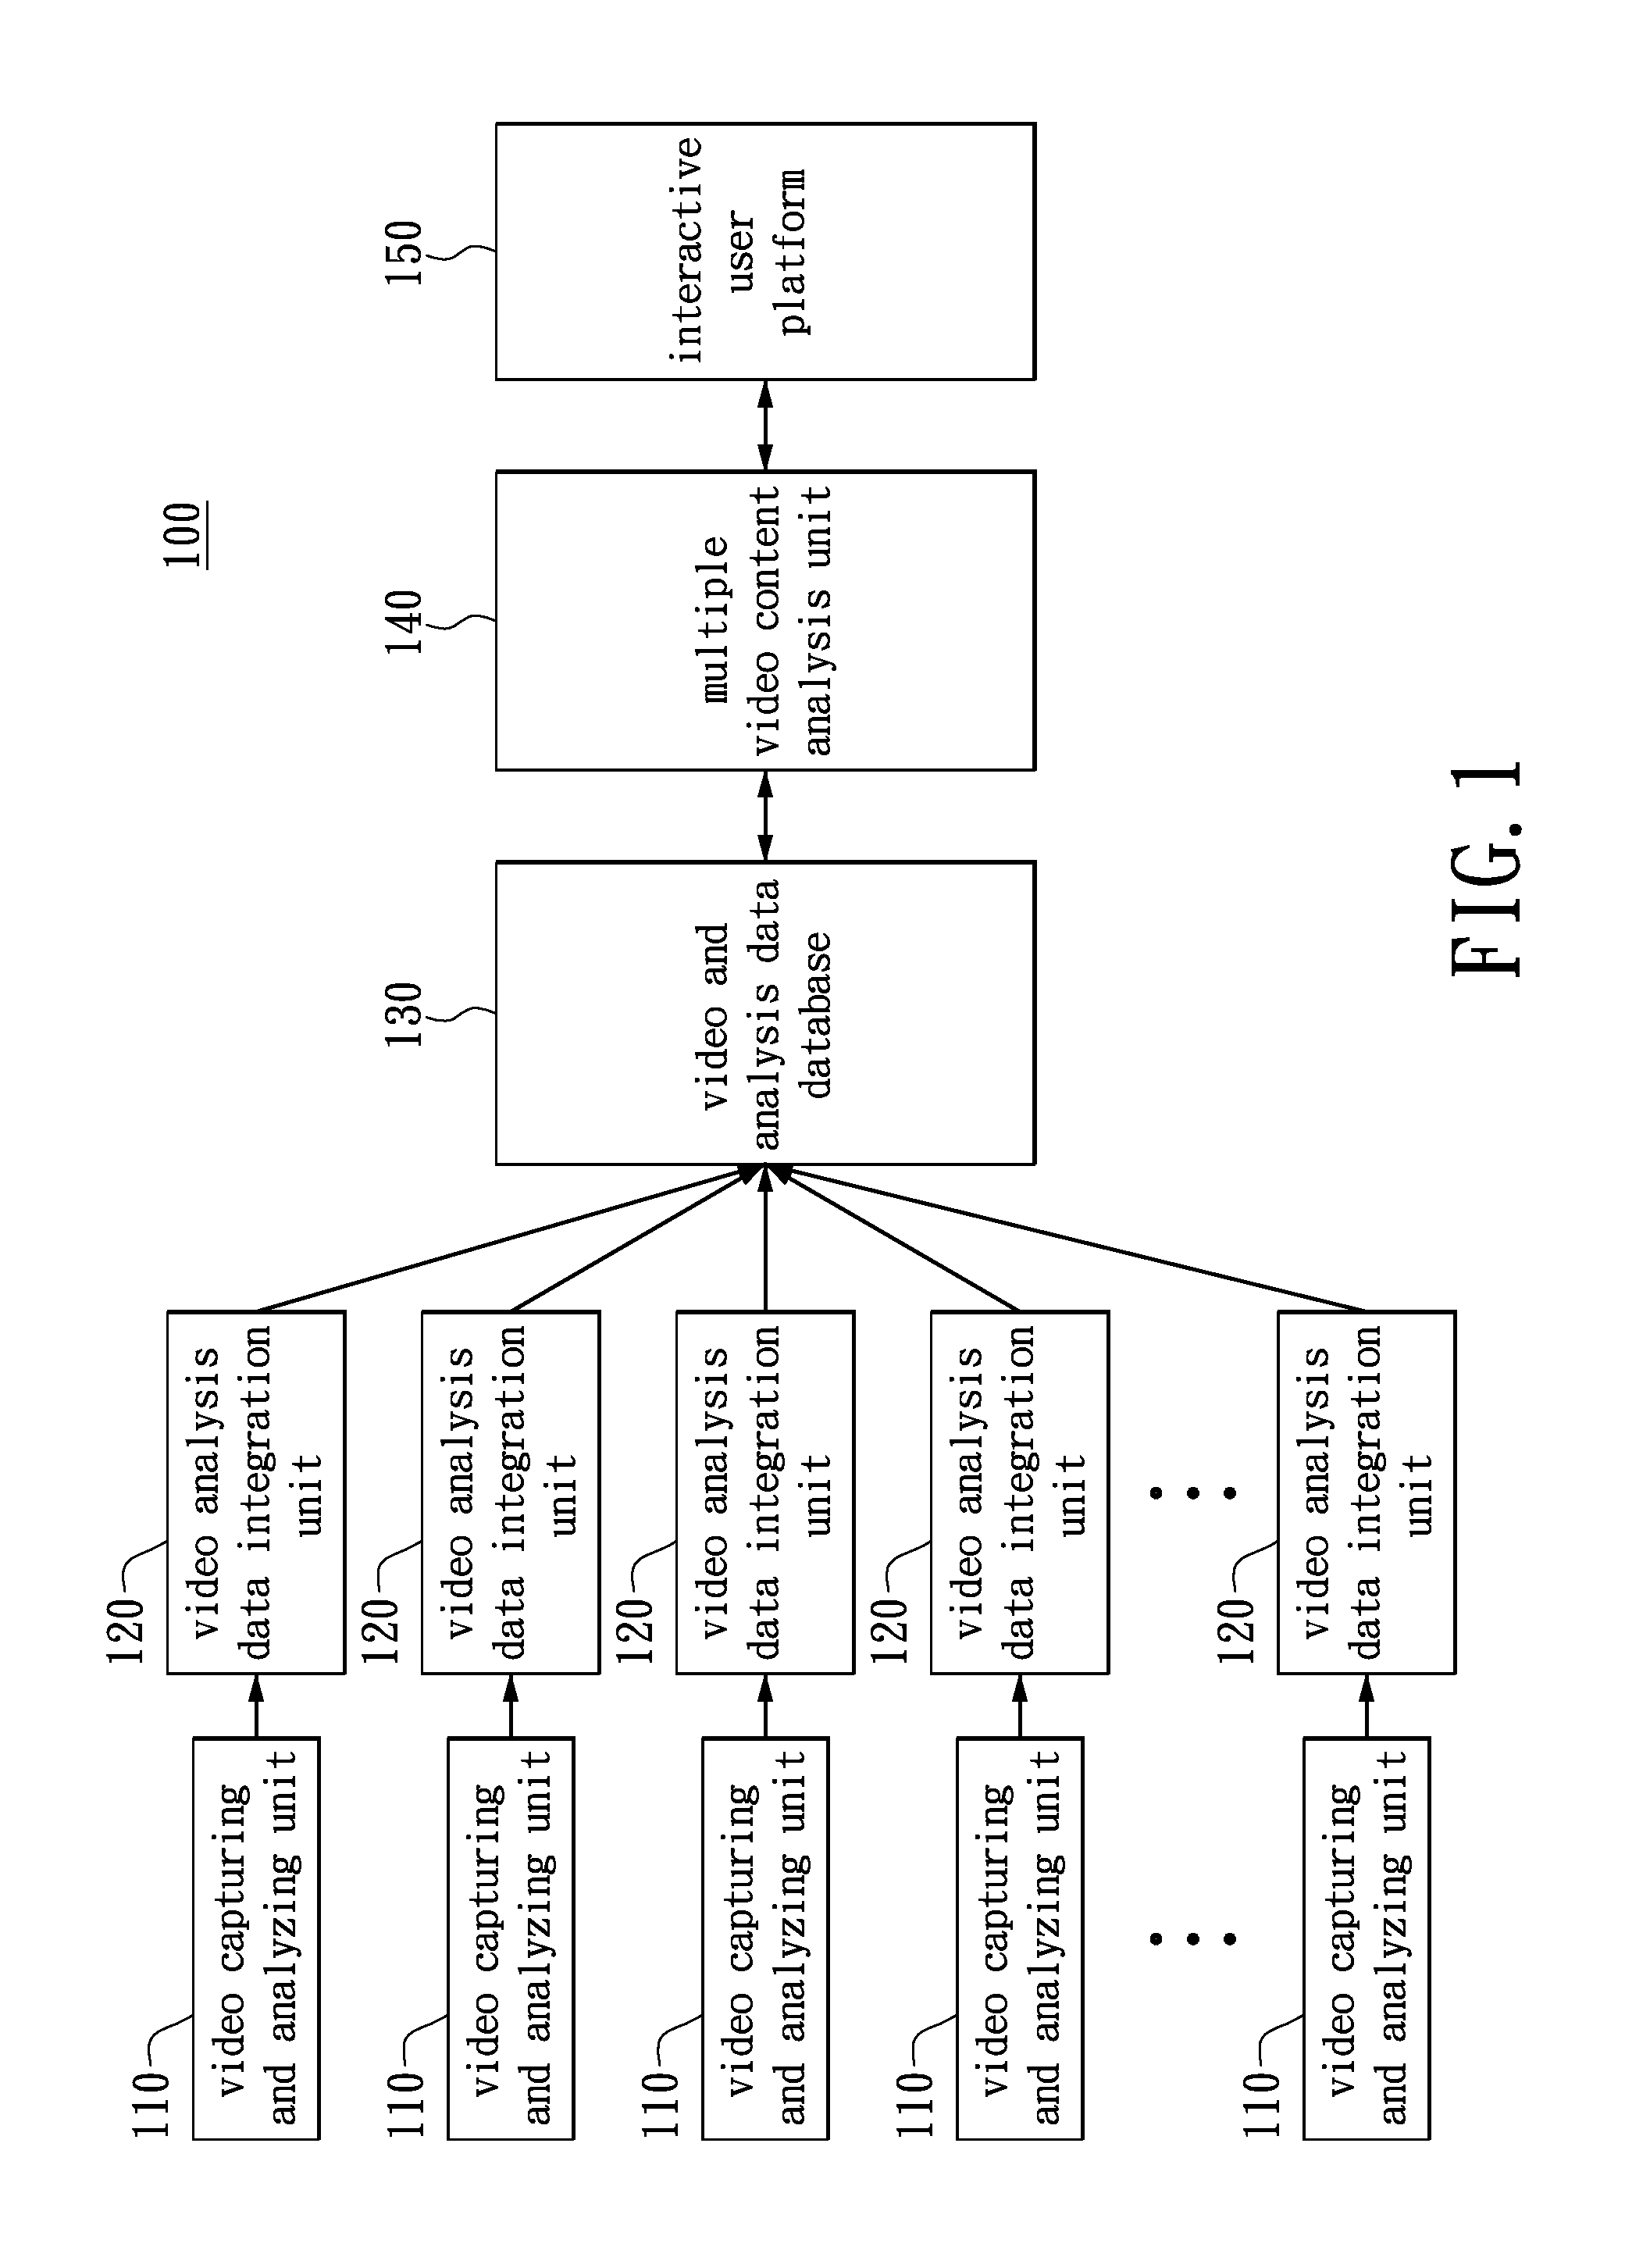 Correction method for object linking across video sequences in a multiple camera video surveillance system